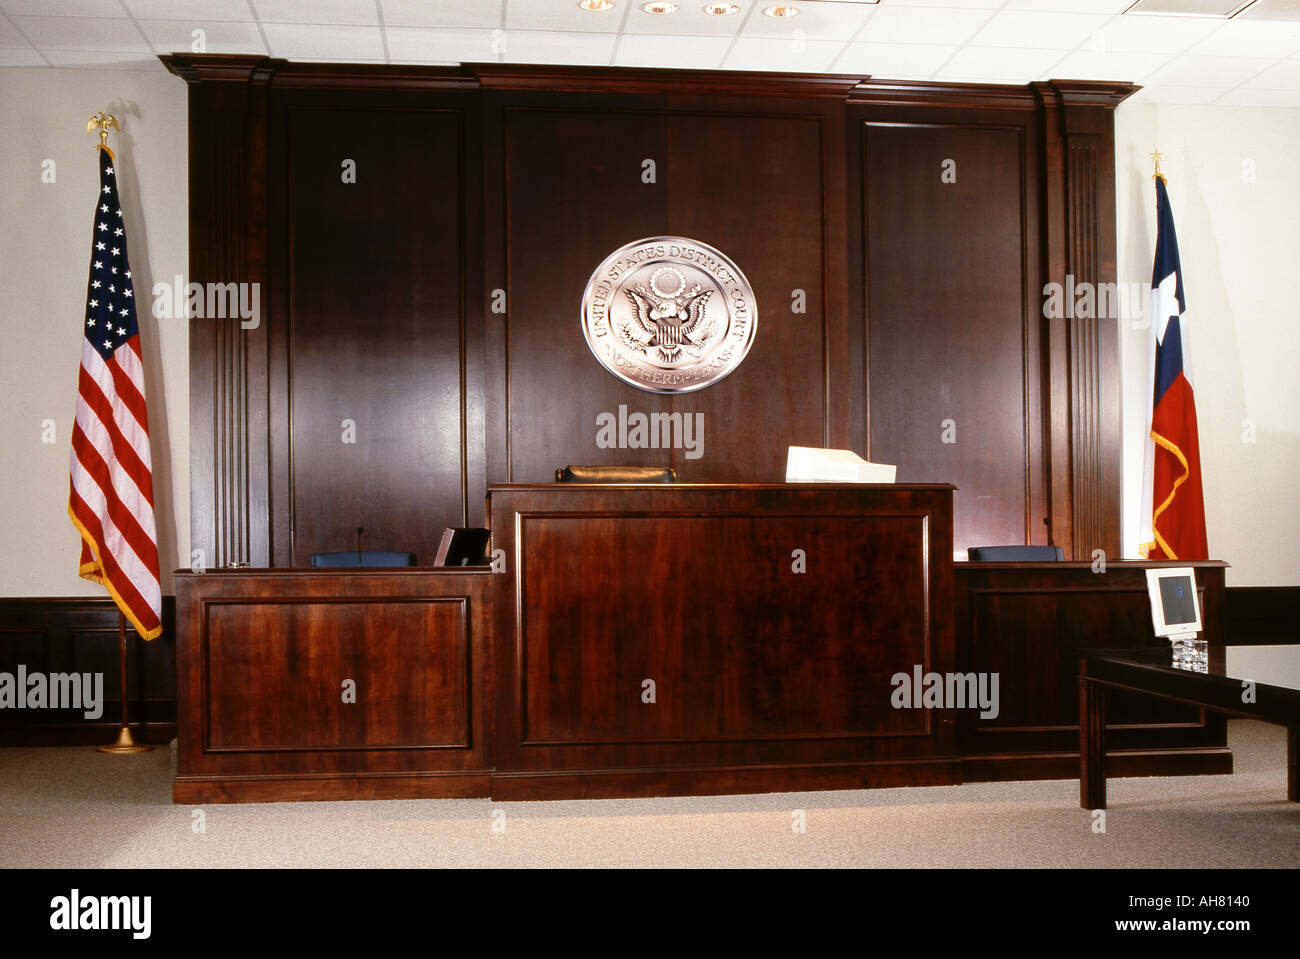 Courtroom and judges bench in courthouse Stock Photo